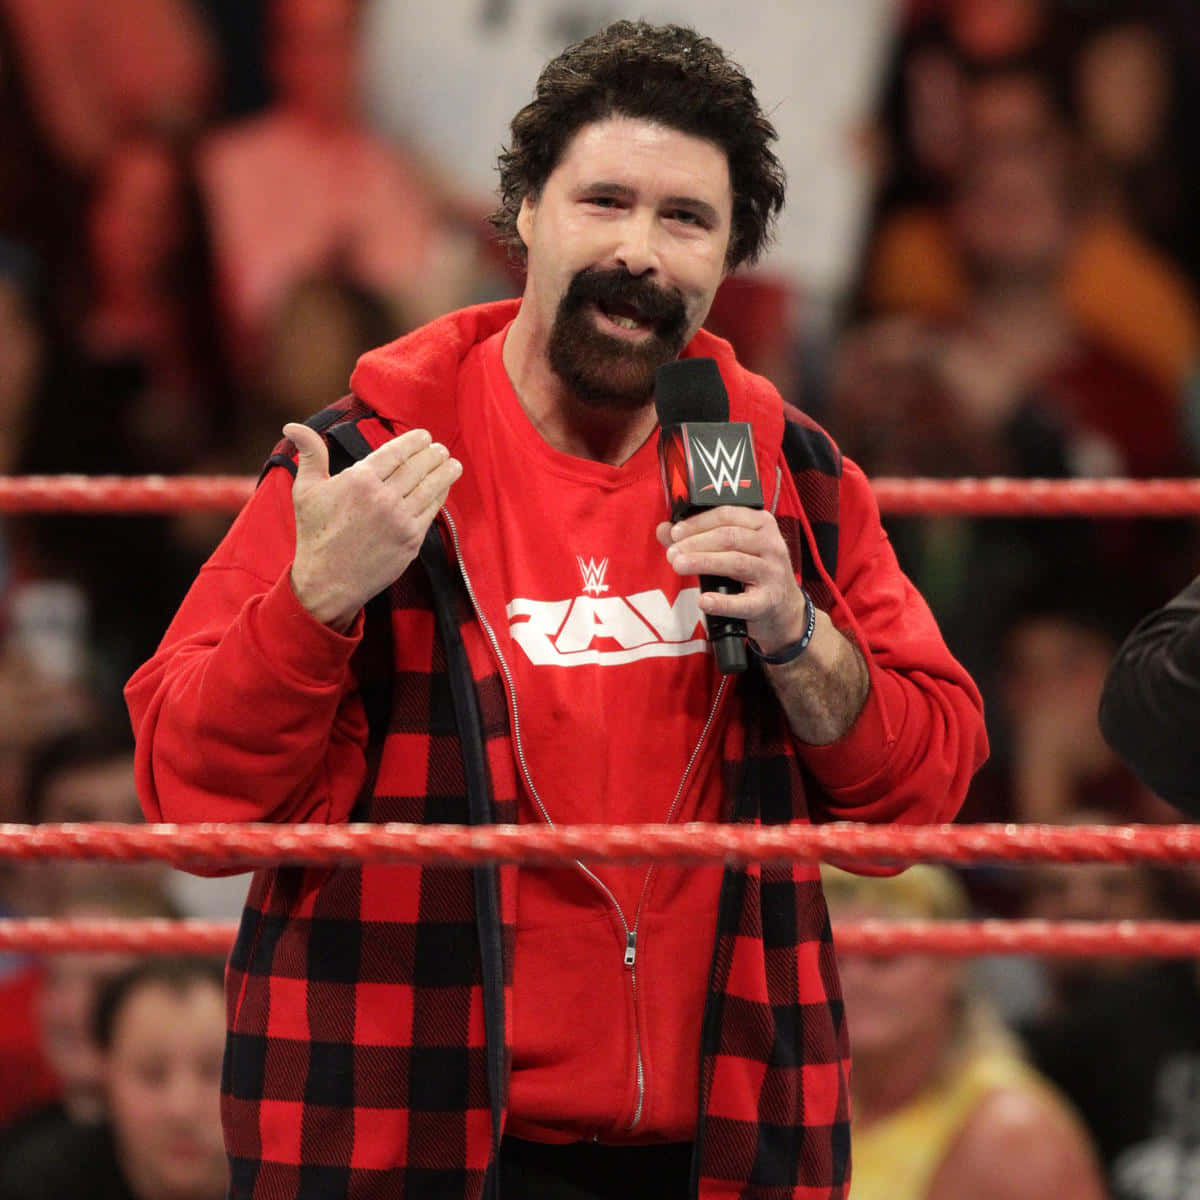 WWE Hall of Famer Mick Foley at WWE RAW Event Wallpaper